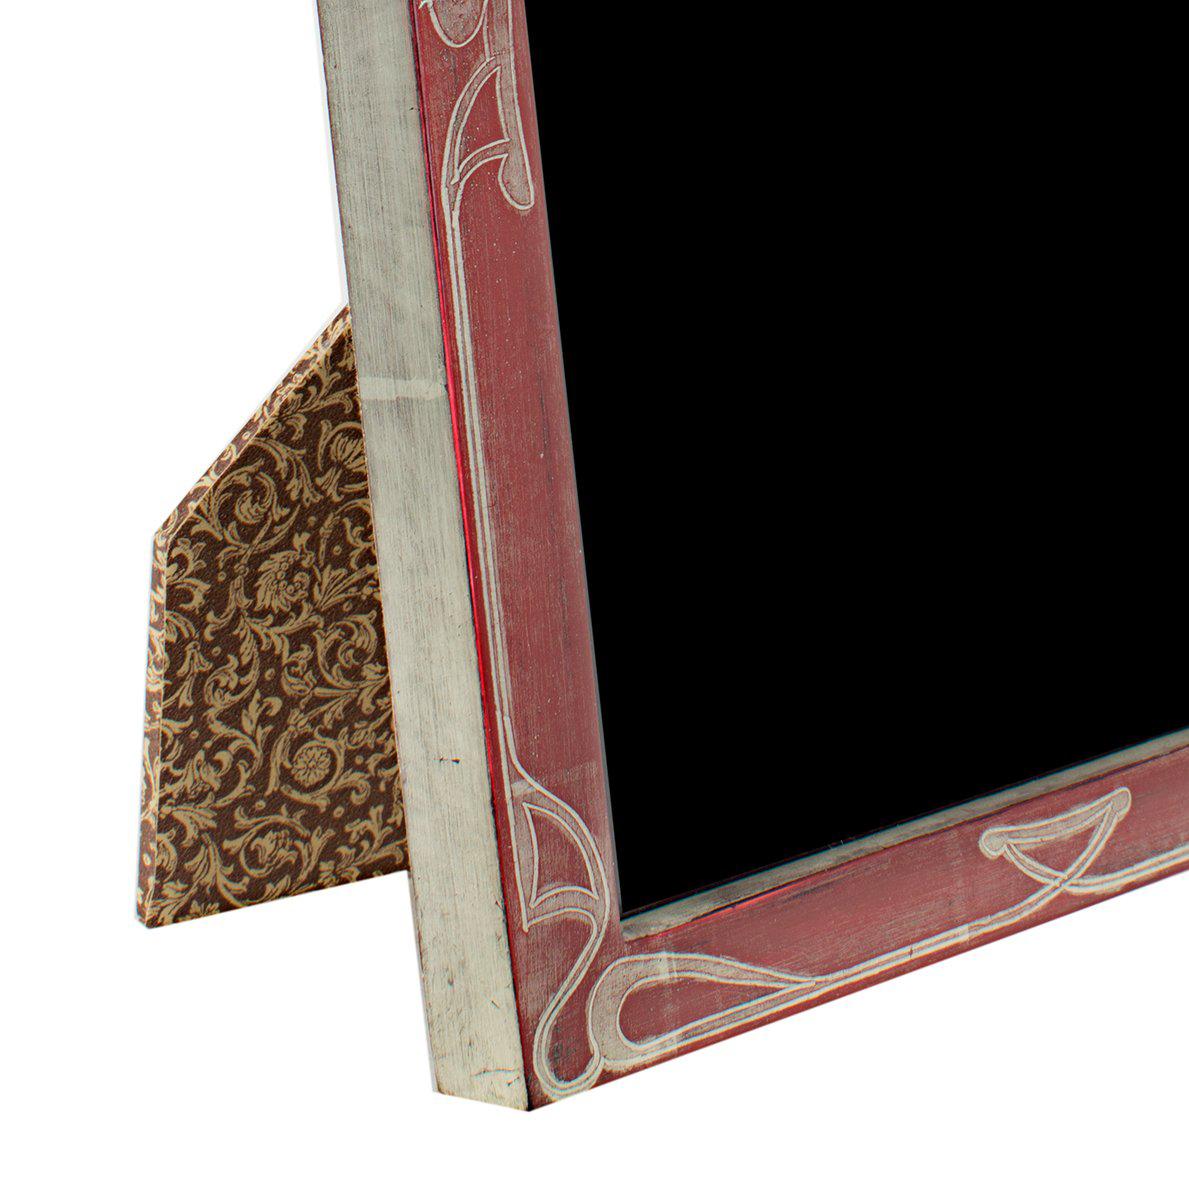 This photo frame was hand-made in Romania and features 12K white gold leafing. It is made out of wood and includes archival plexiglass to protect anything displayed in it from fading or other damage from light. This frame can be used both vertically